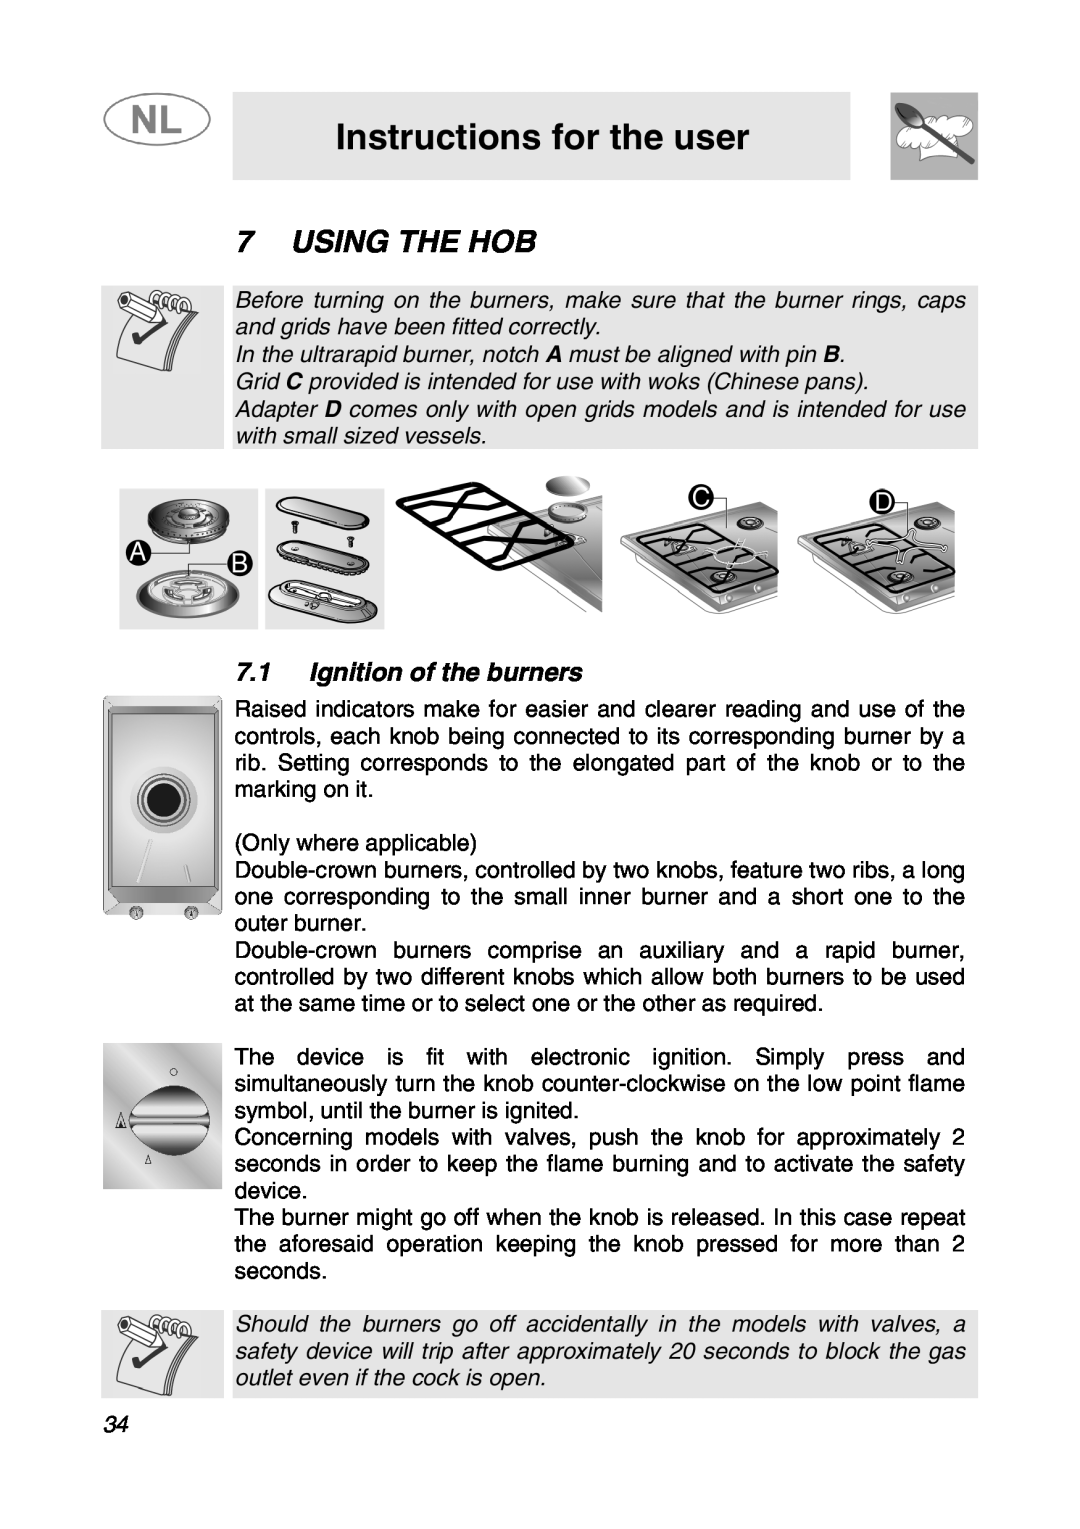 Smeg SNL574GH manual Instructions for the user, Using The Hob, Ignition of the burners 